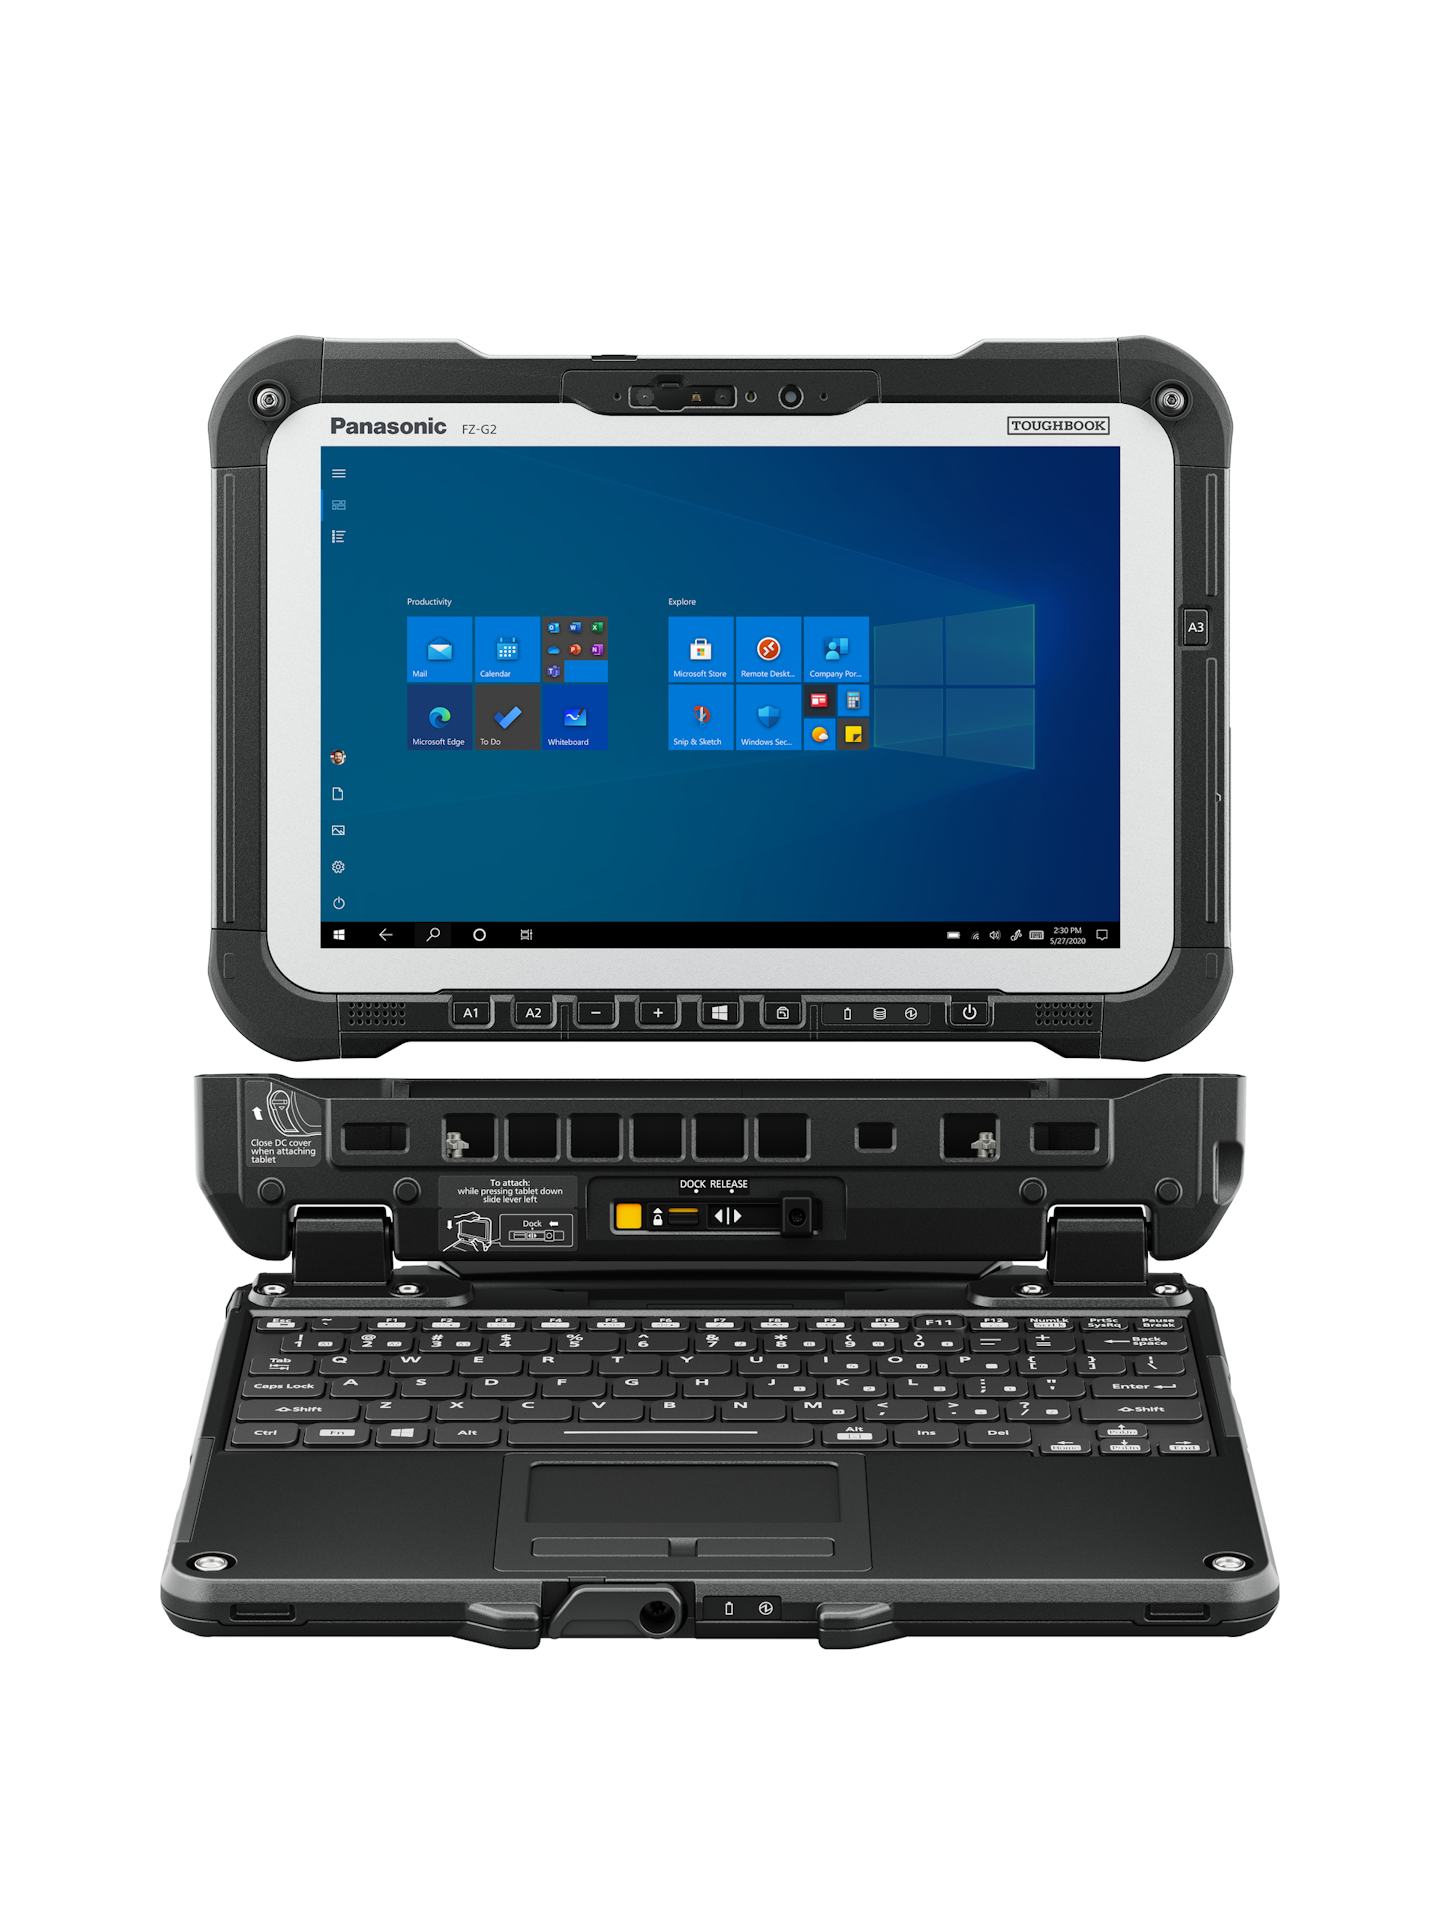  The Panasonic Toughbook G2 can be run entirely in tablet type or be coupled with a keyboard.